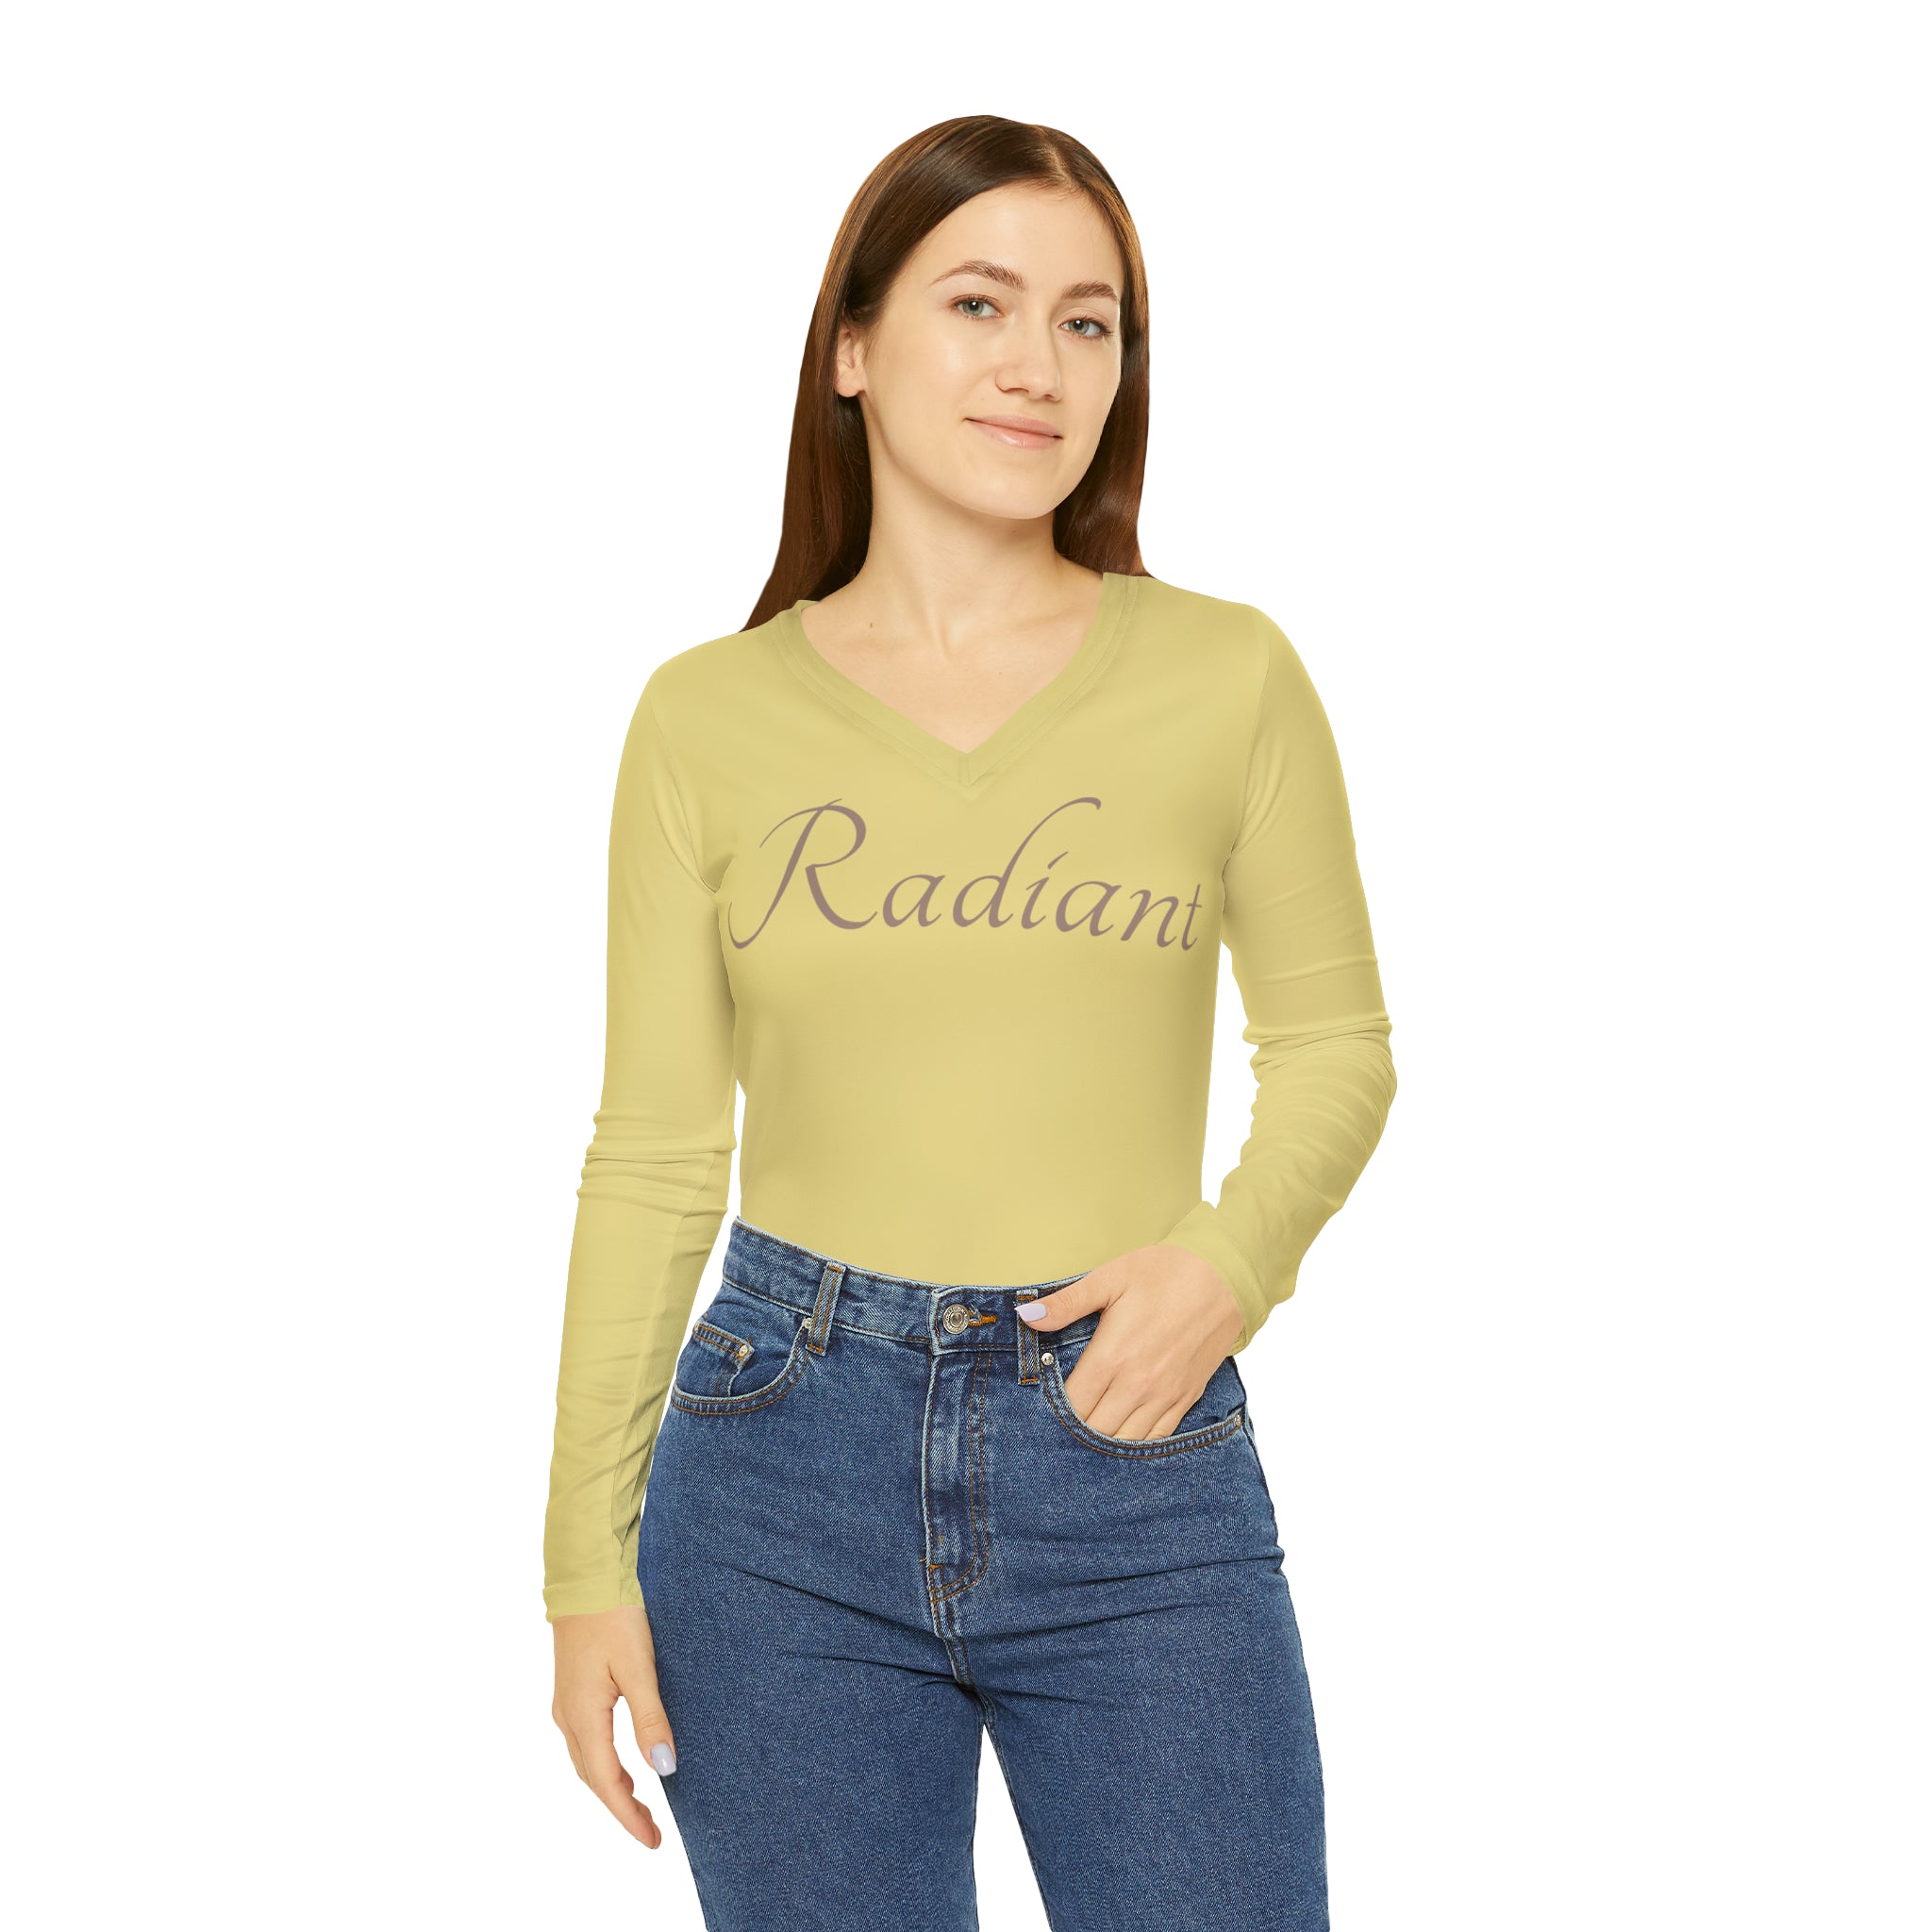 Radiant - Long Sleeve V-neck Shirt Casual Shirt Double Needle Stitching Everyday Wear Mental Health Donation Polyester Spandex Blend Radiant Shirt Statement Shirt All Over Prints 13744574679419969839_2048 Printify